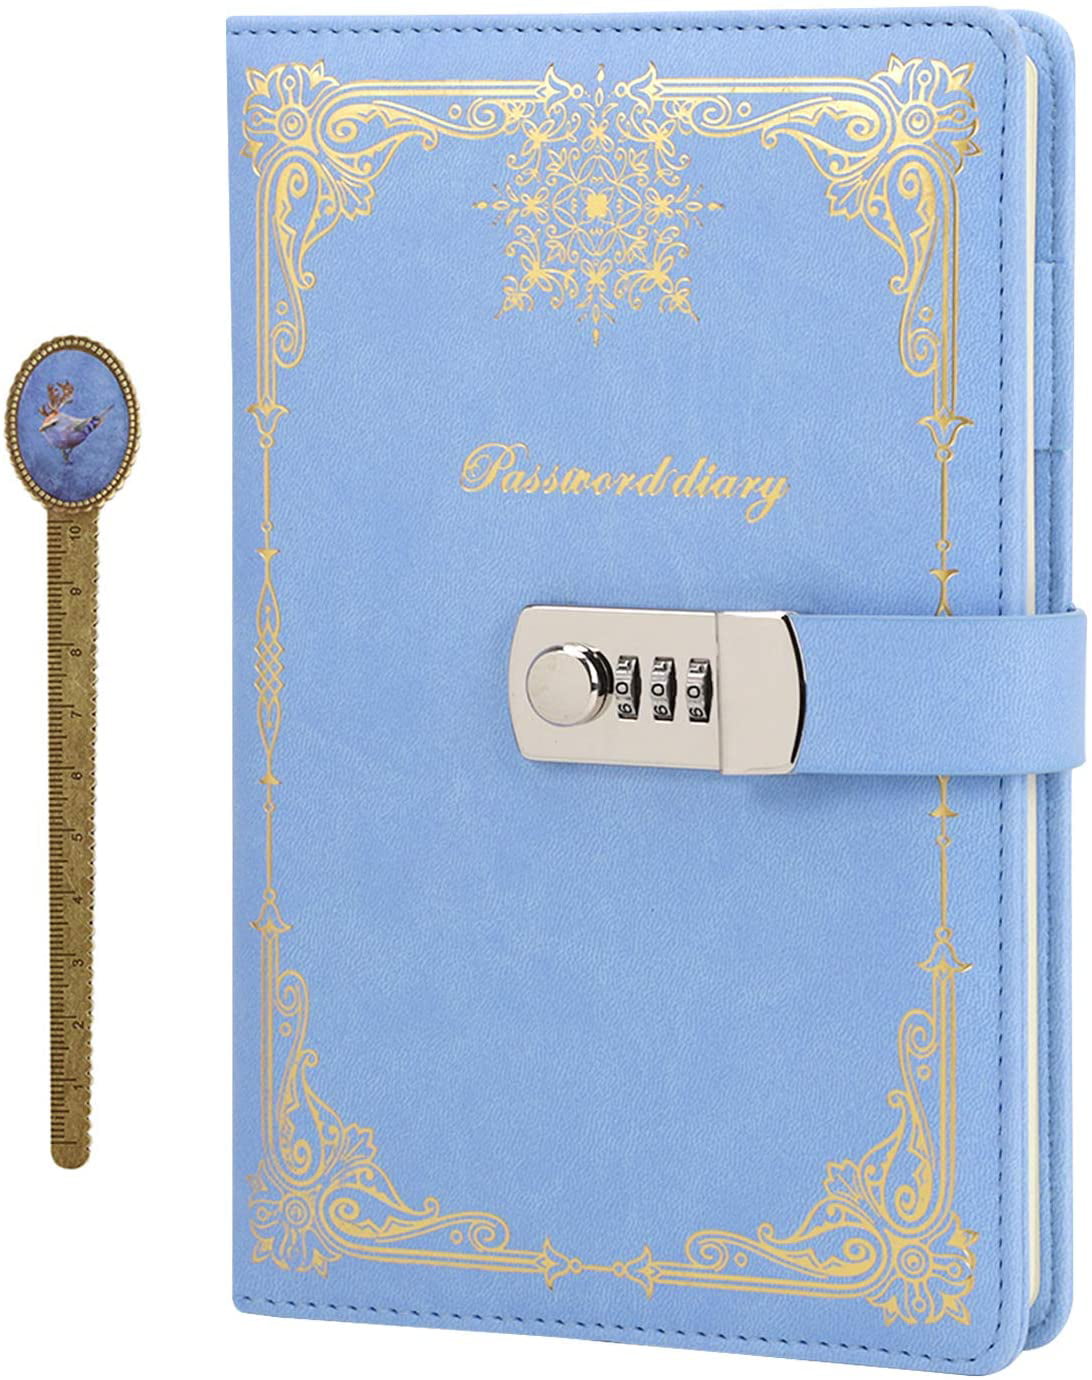 Card Slots Soft PU Leather Writing Journal Portable A5 Travel Diary Lined Pages Business Notepad Vintage Embossed Notebook with Combination Lock Pen Loop 100 Sheets 